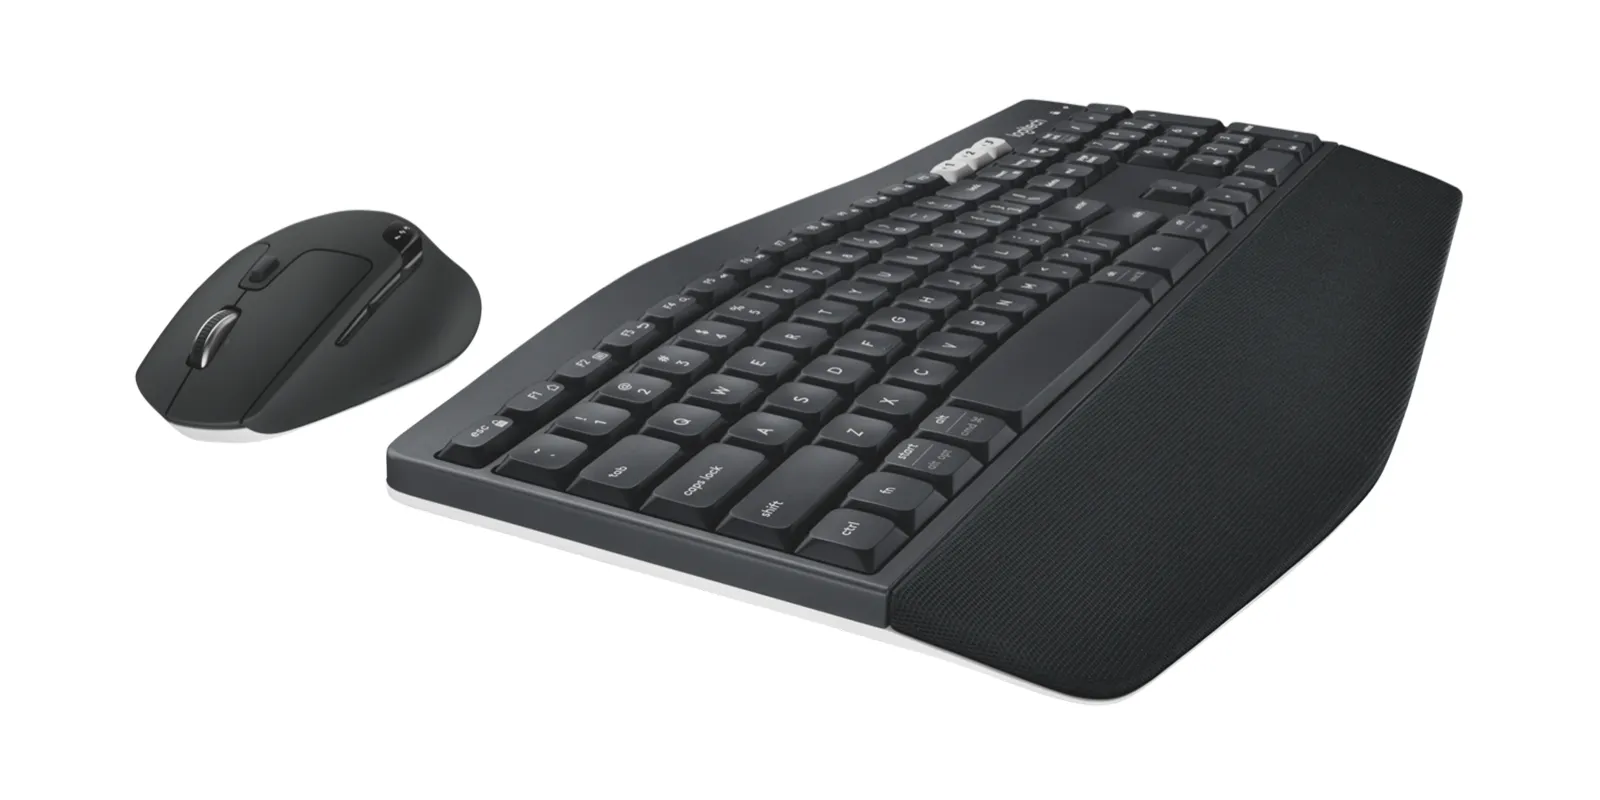 Achat Logitech MK850 Performance Wireless Keyboard and Mouse sur hello RSE - visuel 5